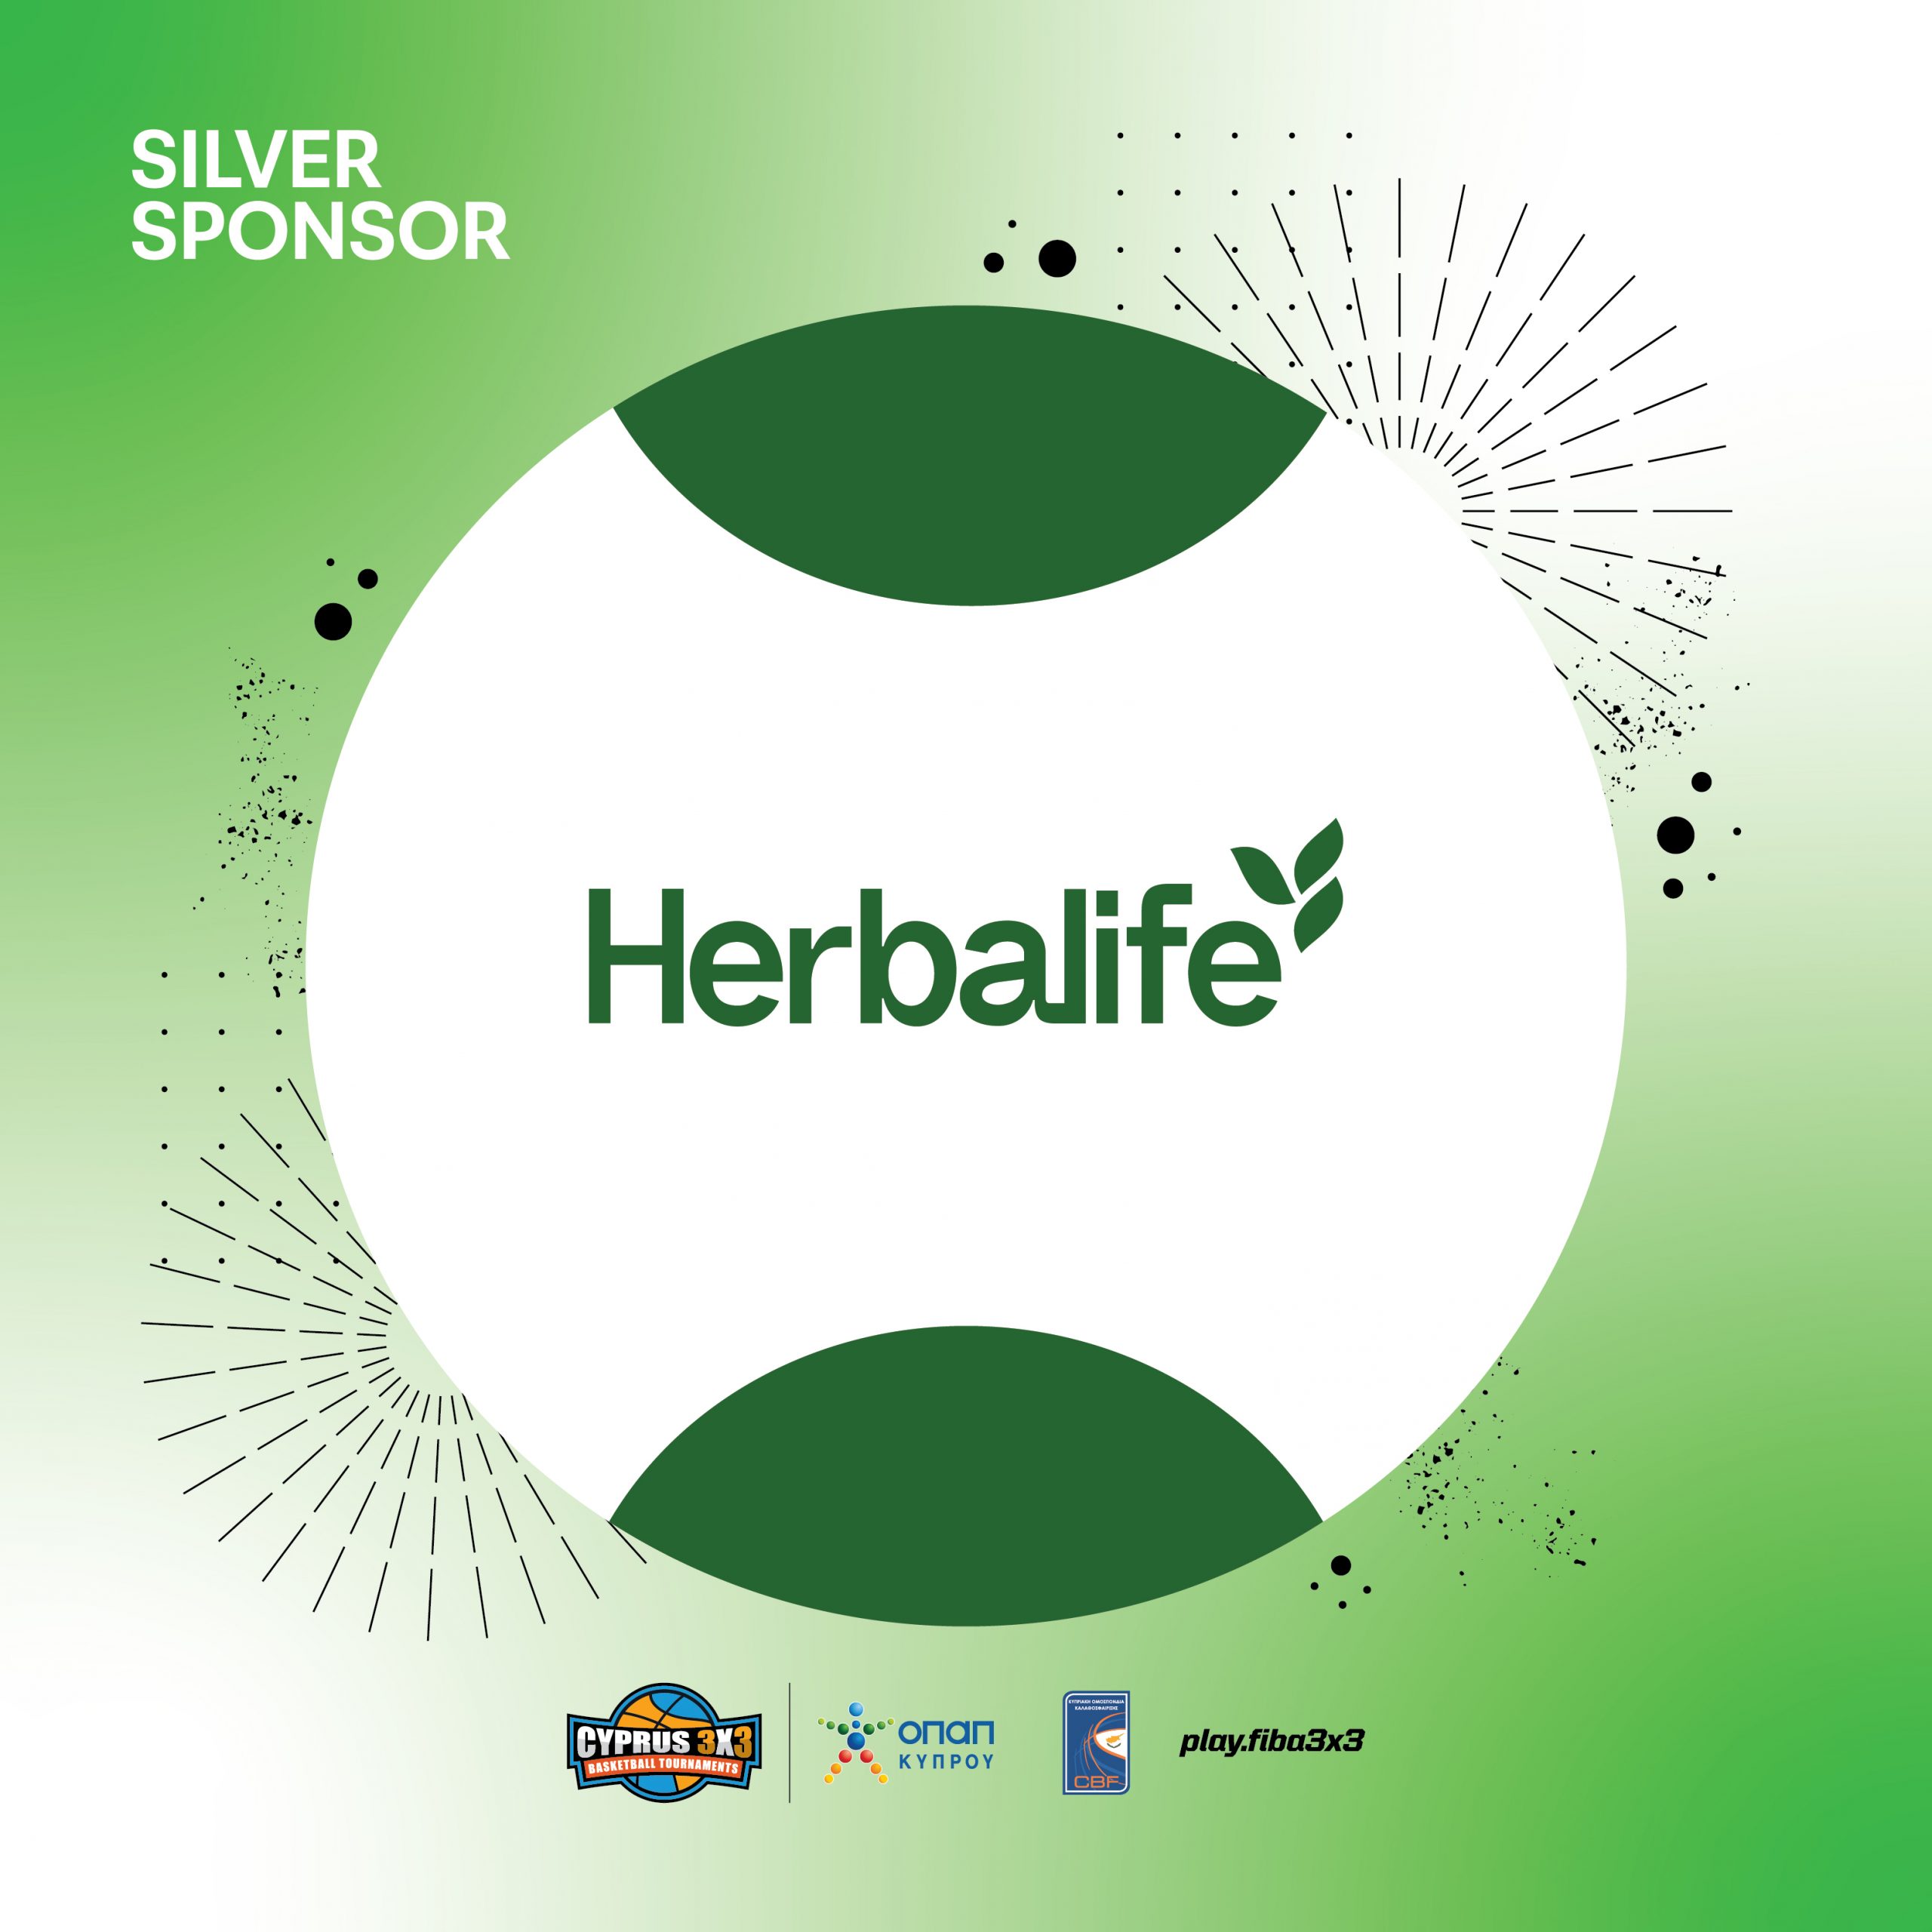 ONCE AGAIN – HERBALIFE IS OUR SILVER SPONSOR!